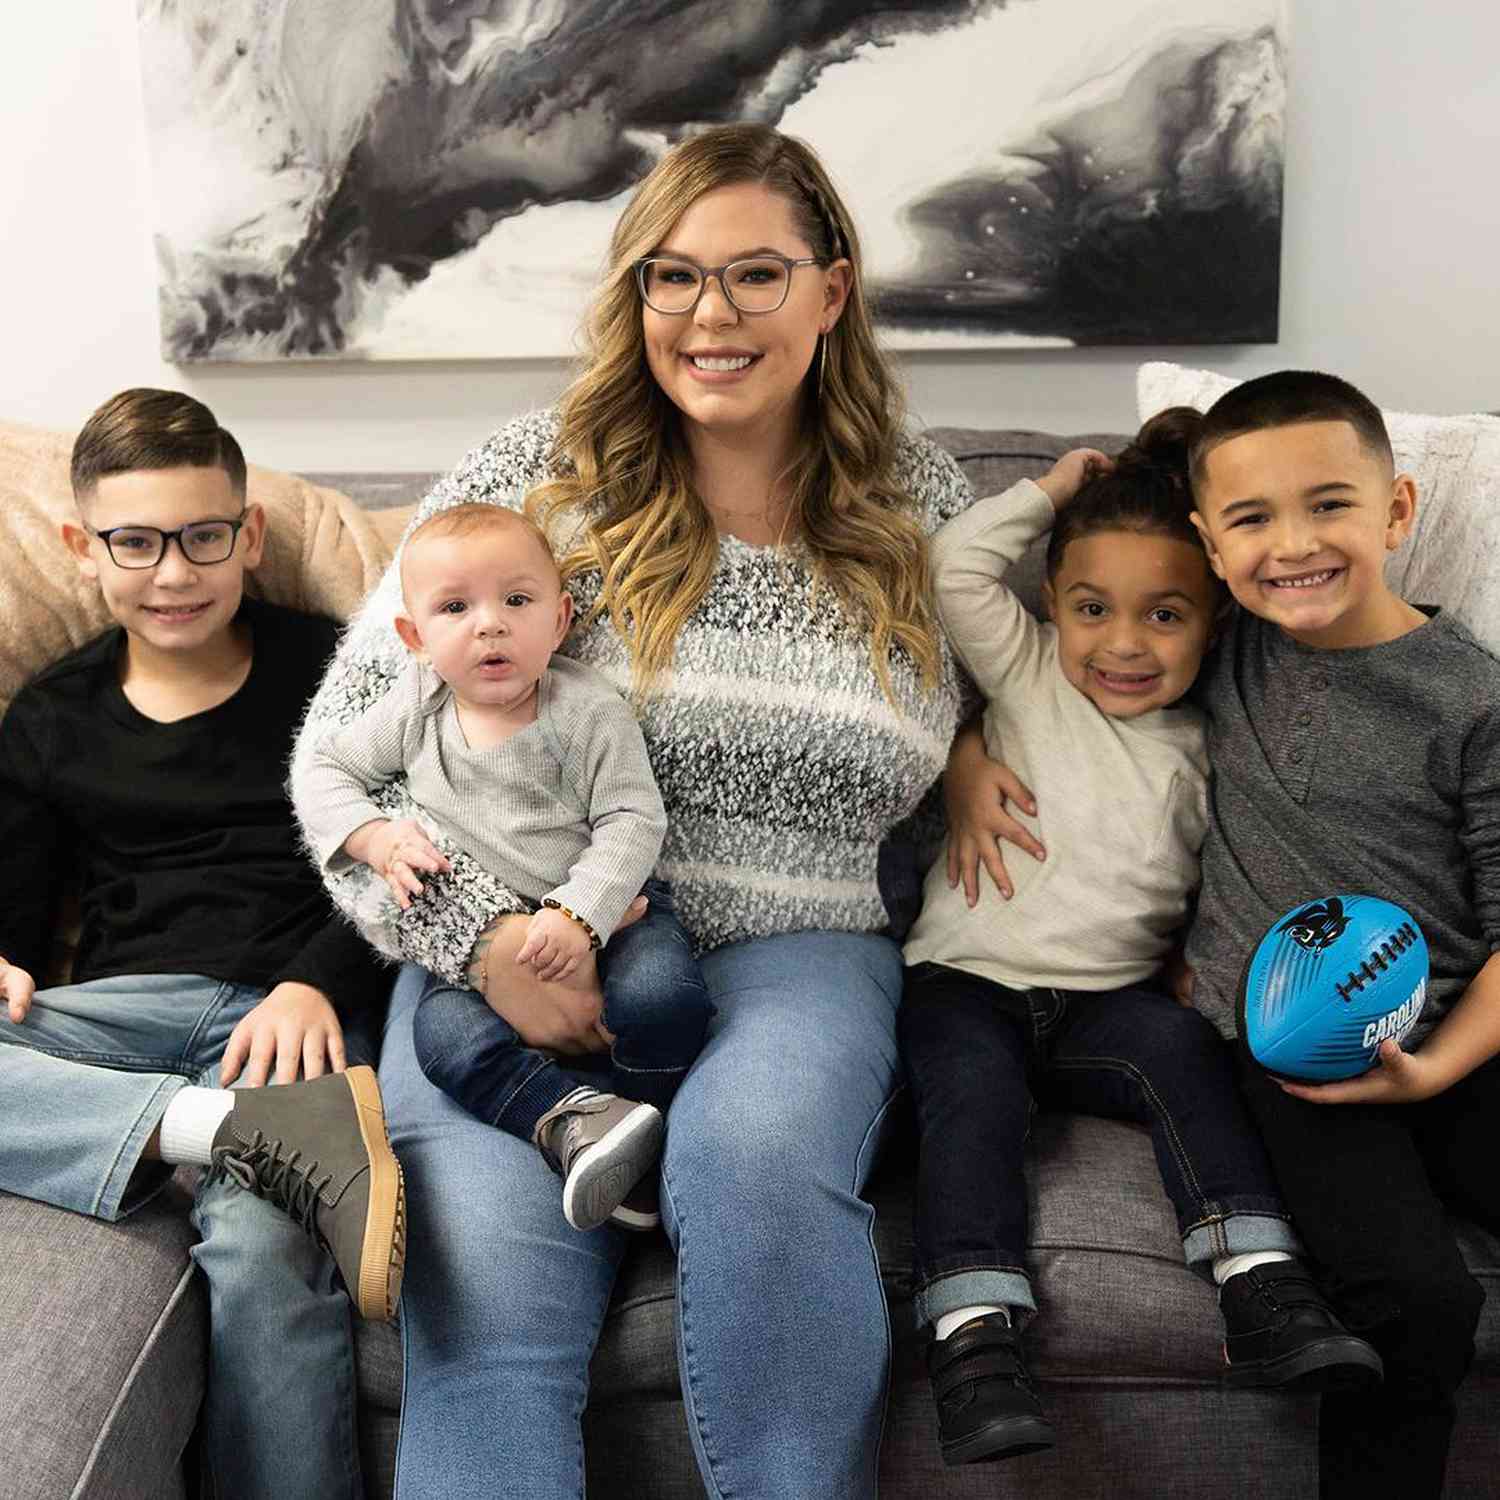 Kailyn Lowry Will Let Her Kids Watch Teen Mom 2 But 'Not Right Now' | People.com